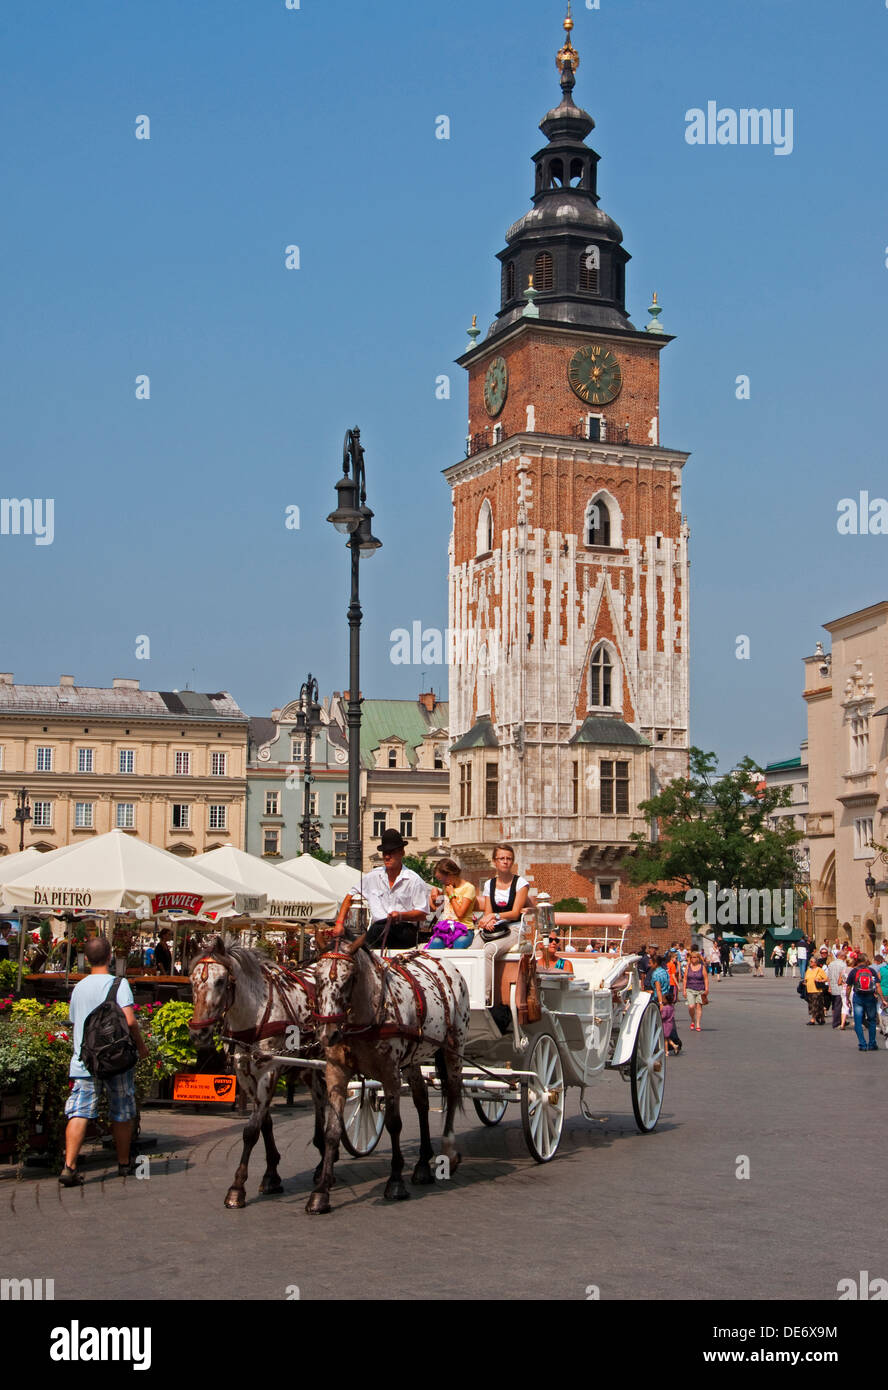 Krakow's Main Market Square with horse-drawn carriage and Town Hall Tower Stock Photo